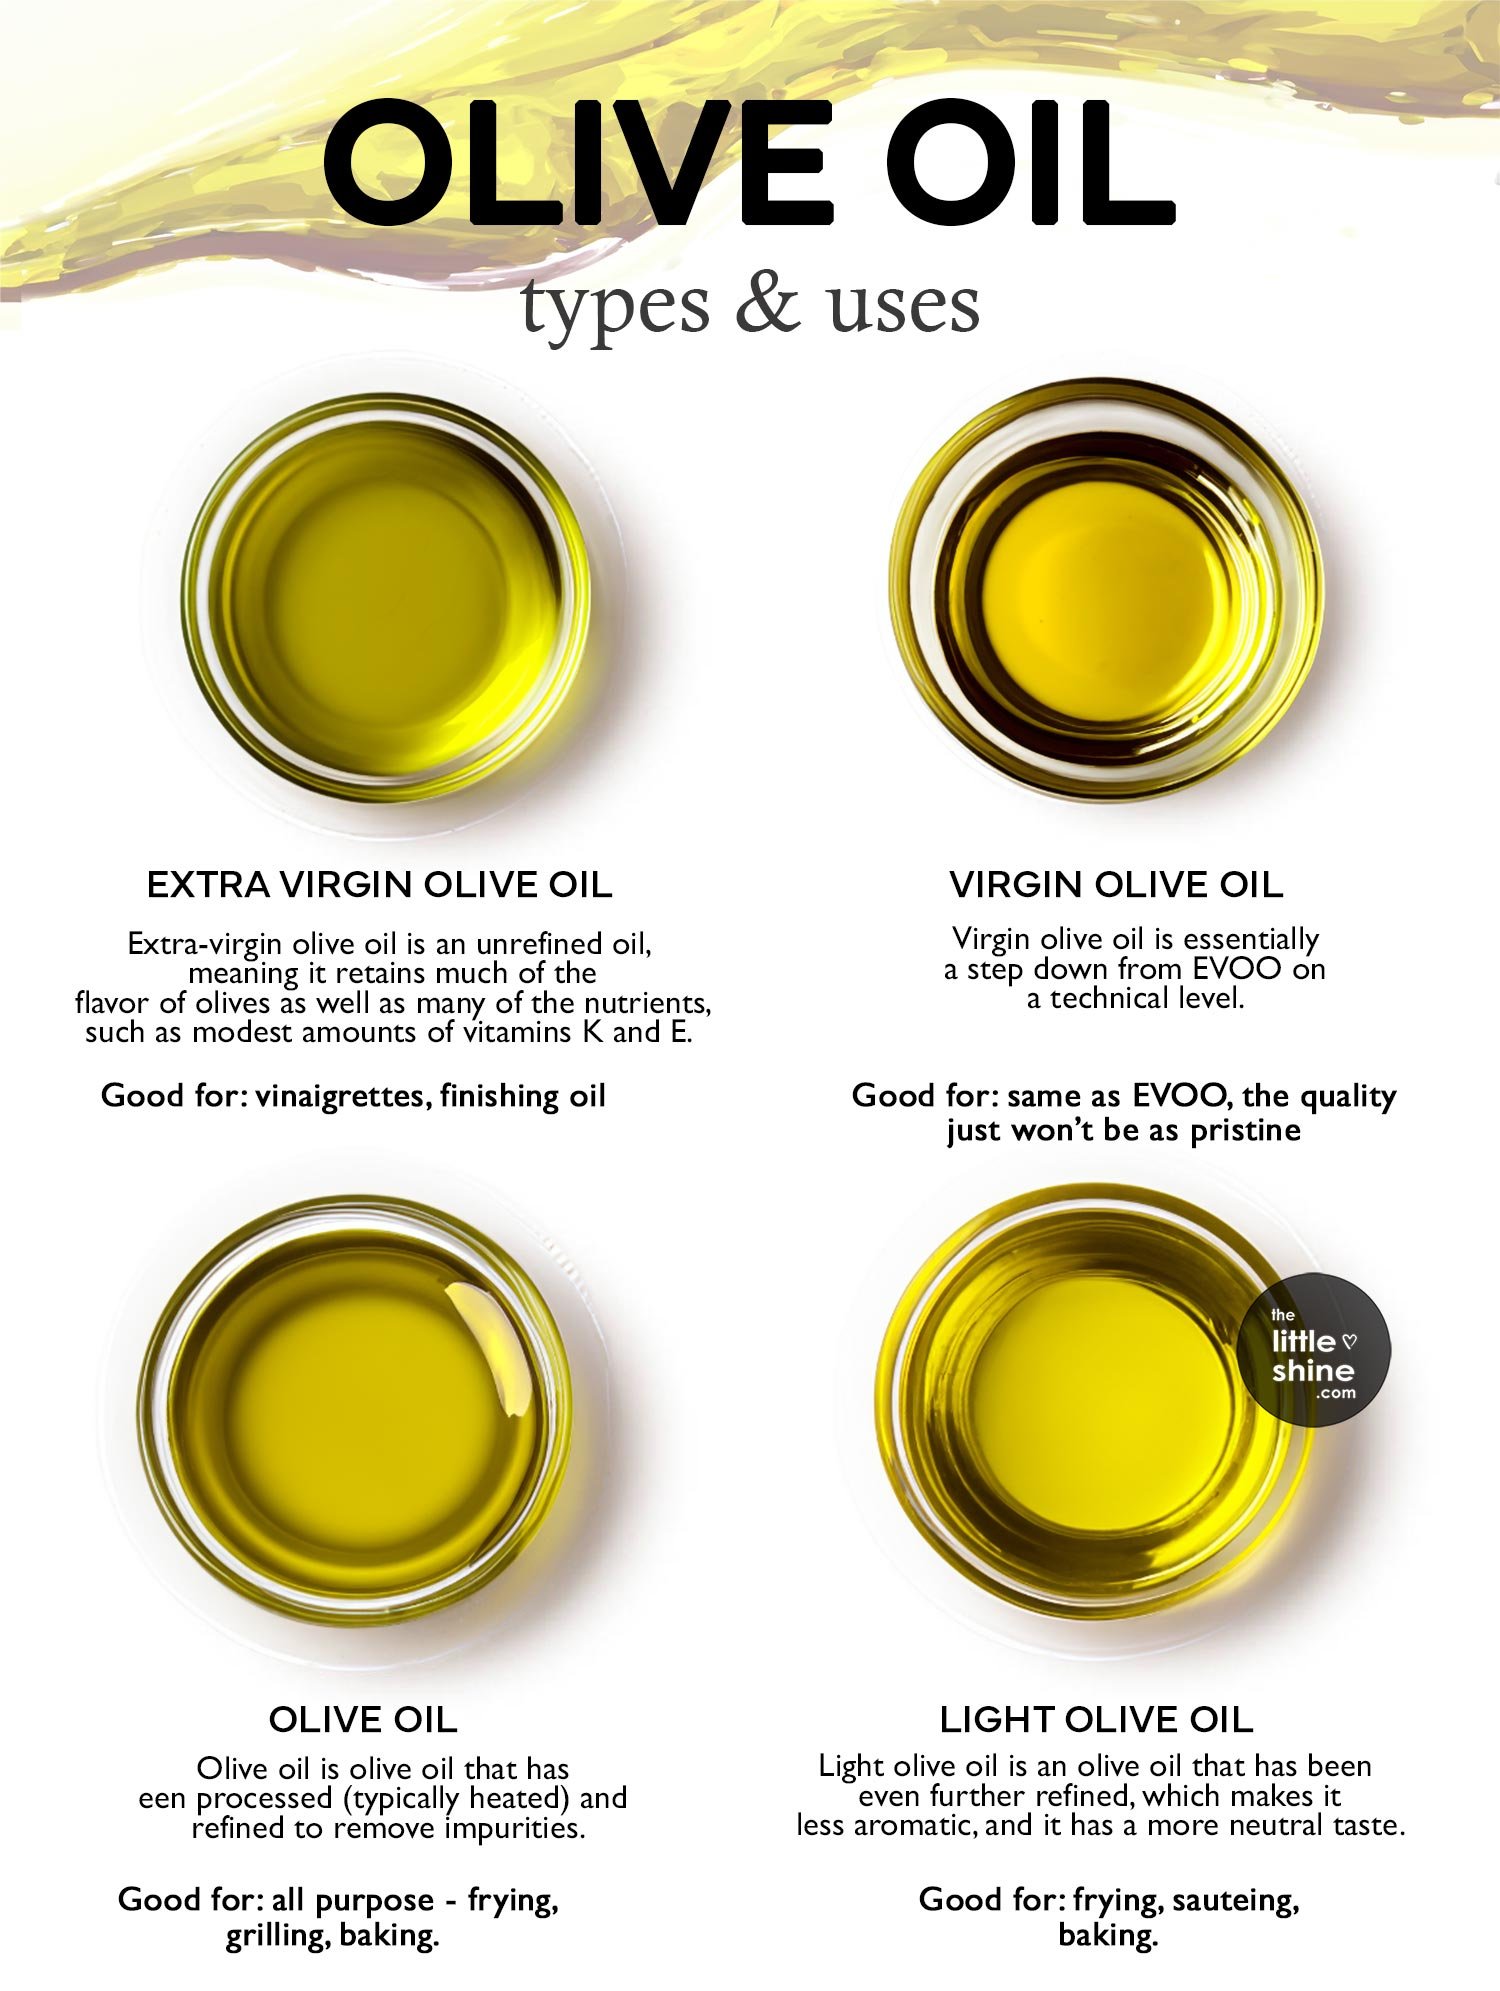 TYPES OF OLIVE OIL